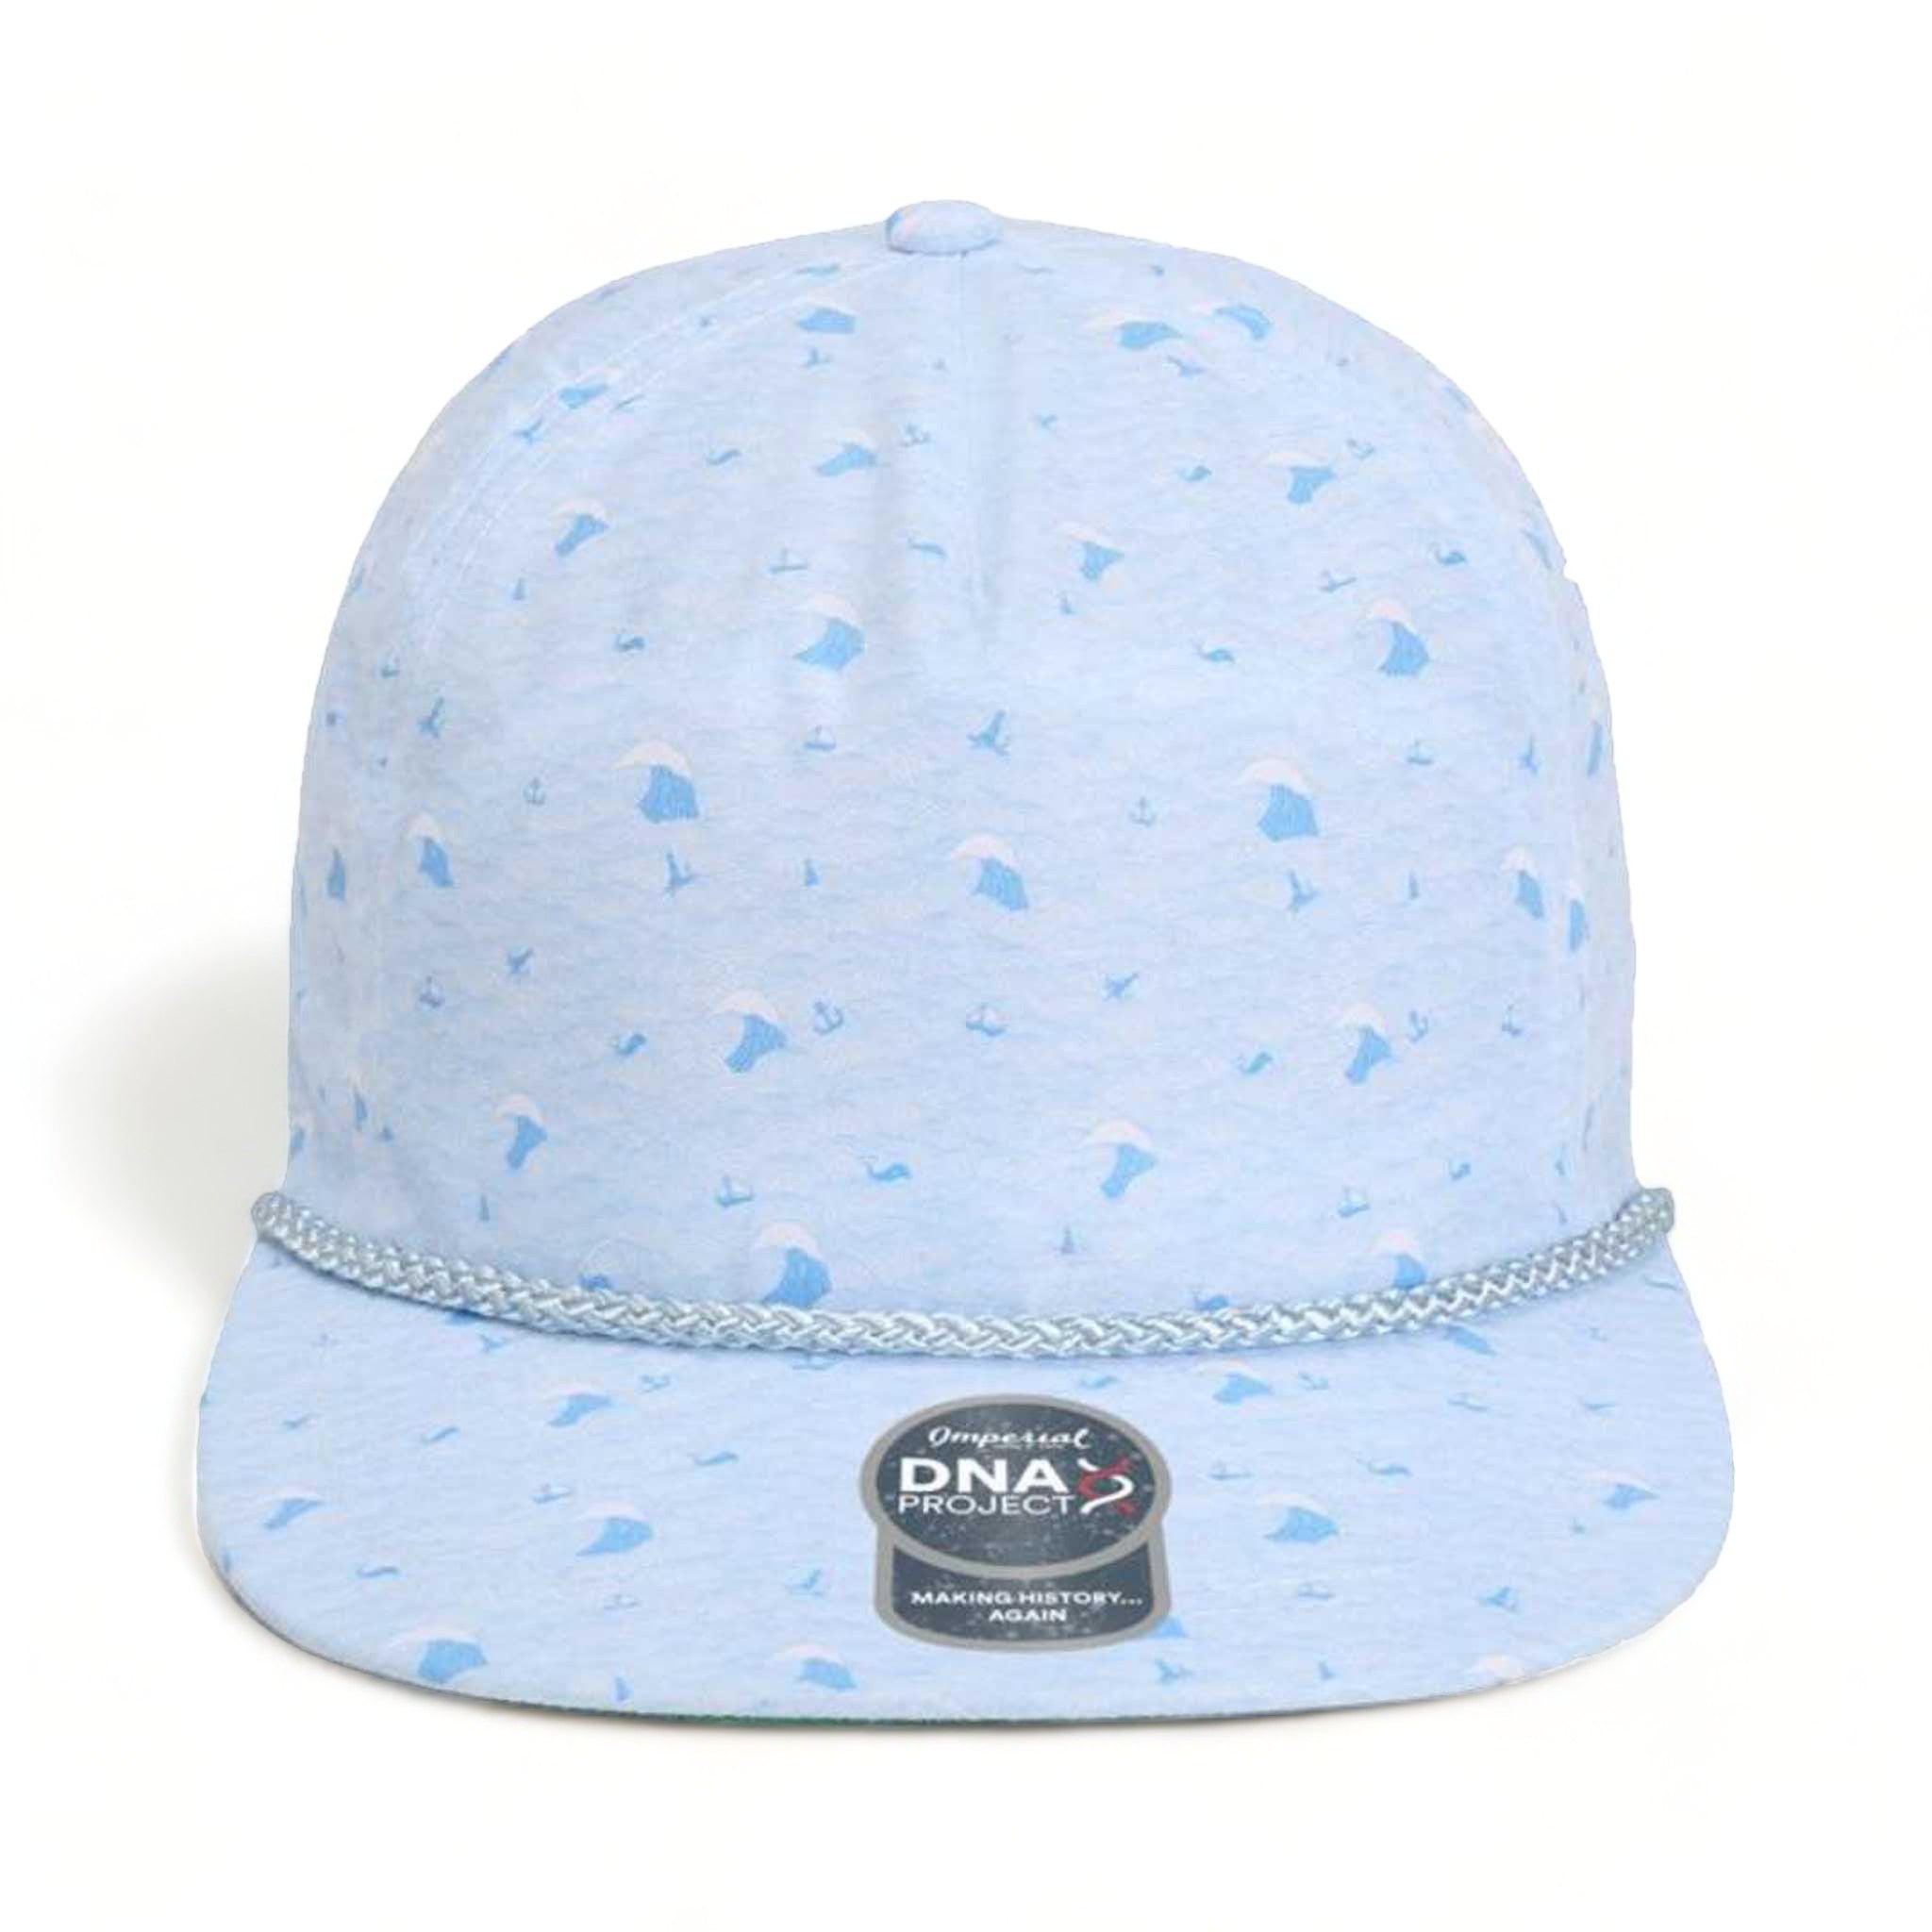 Front view of Imperial DNA010 custom hat in blue waves